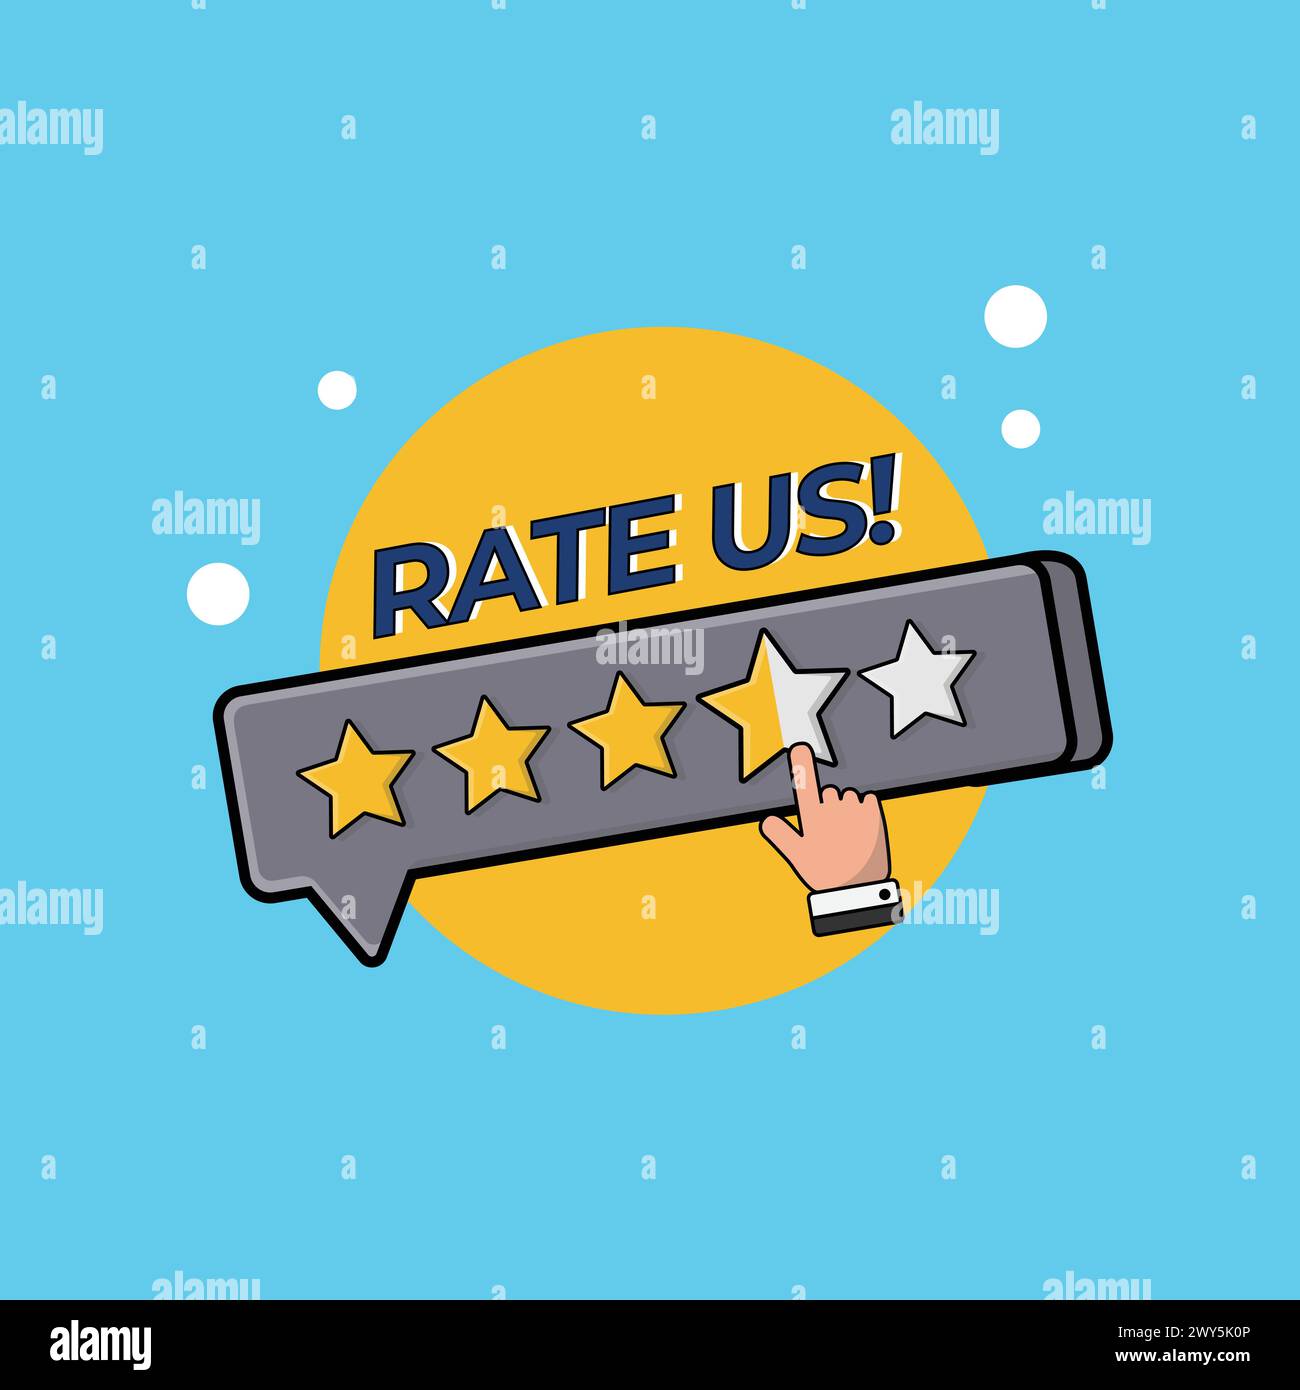 Customer or Client Rating Vector Illustration Design. Business Review and Rating Concept Design Stock Vector